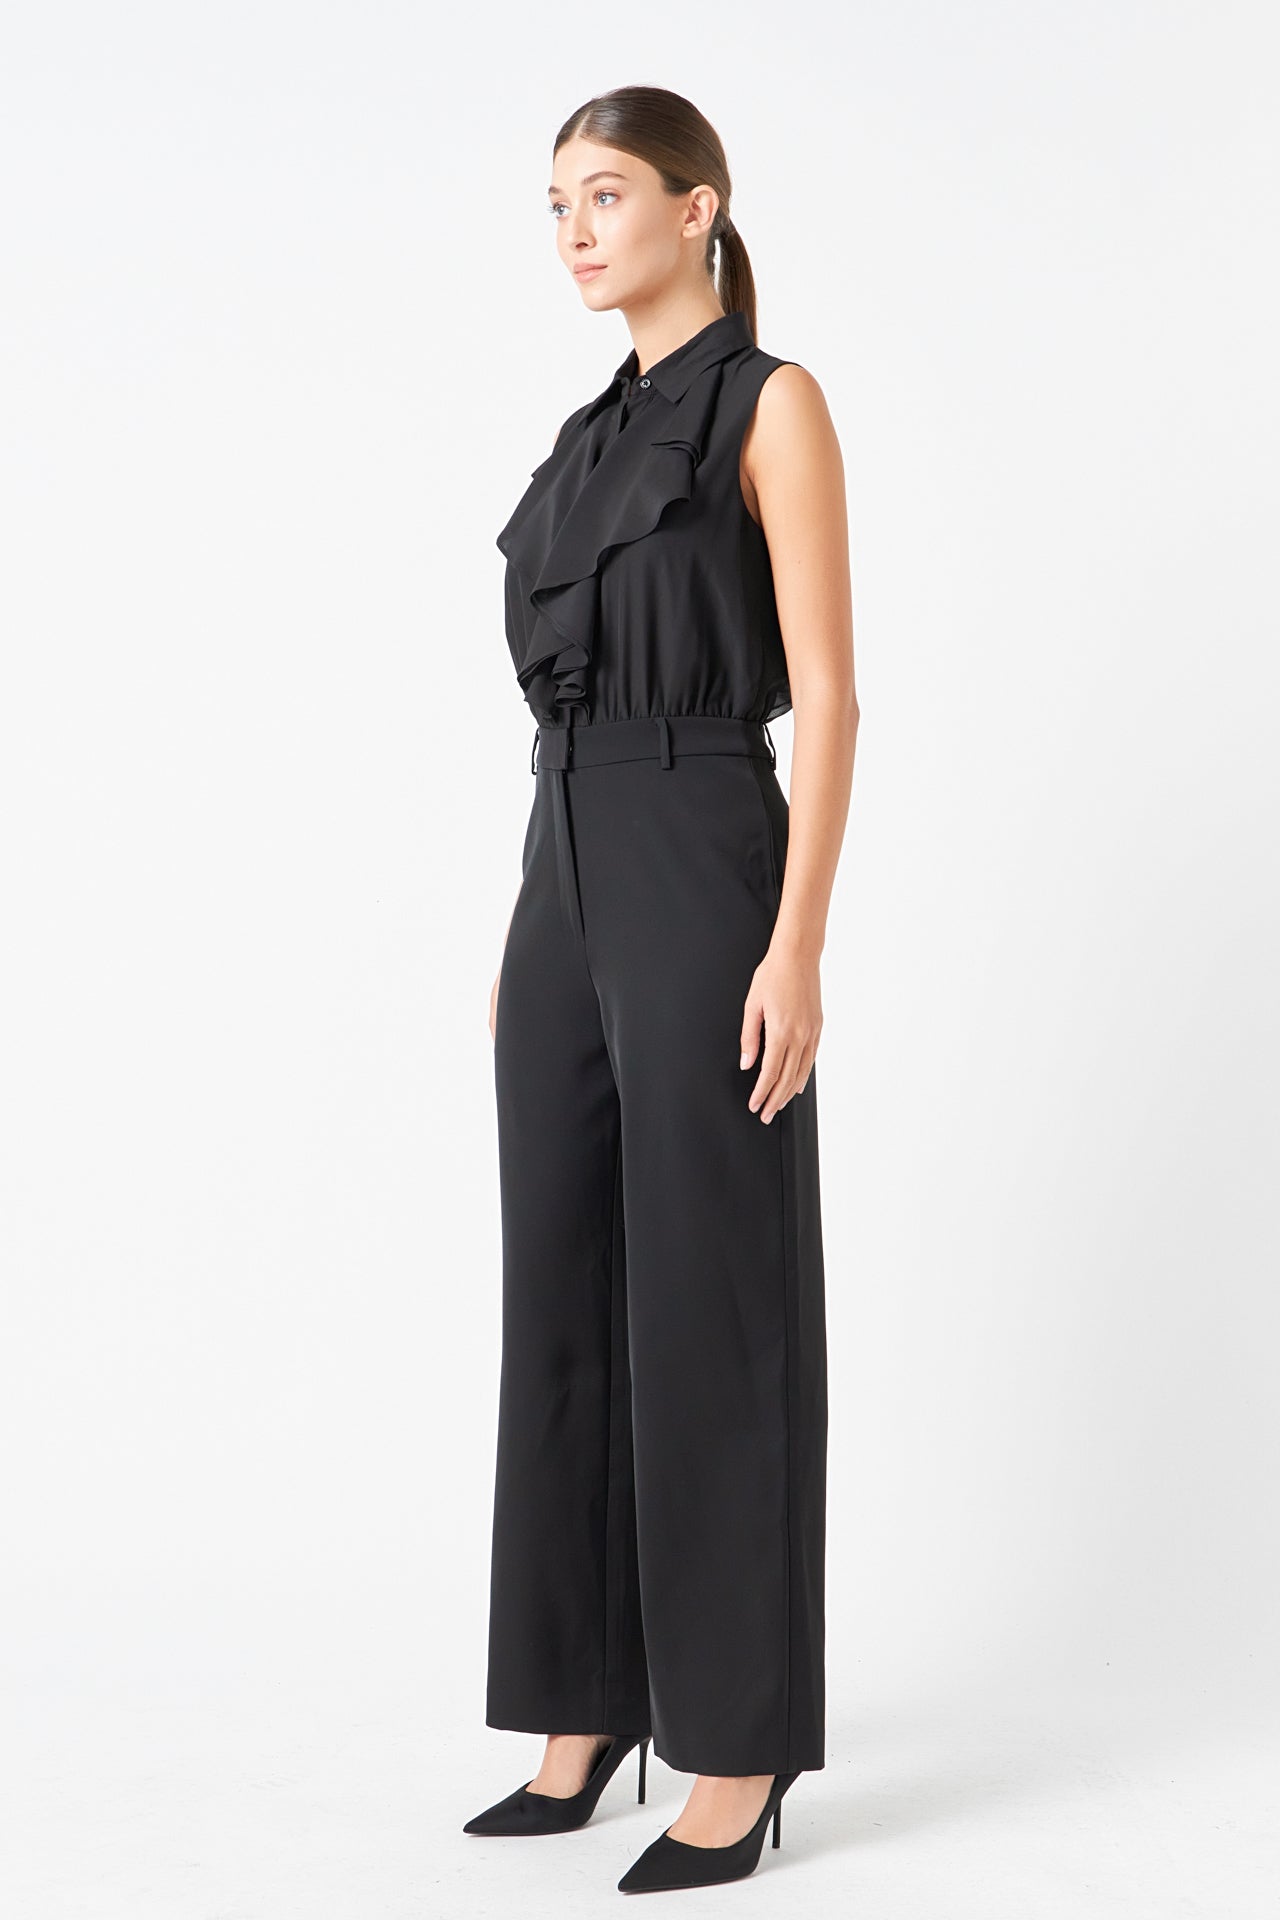 ENDLESS ROSE - Sleeveless Ruffle Jumpsuit - JUMPSUITS available at Objectrare